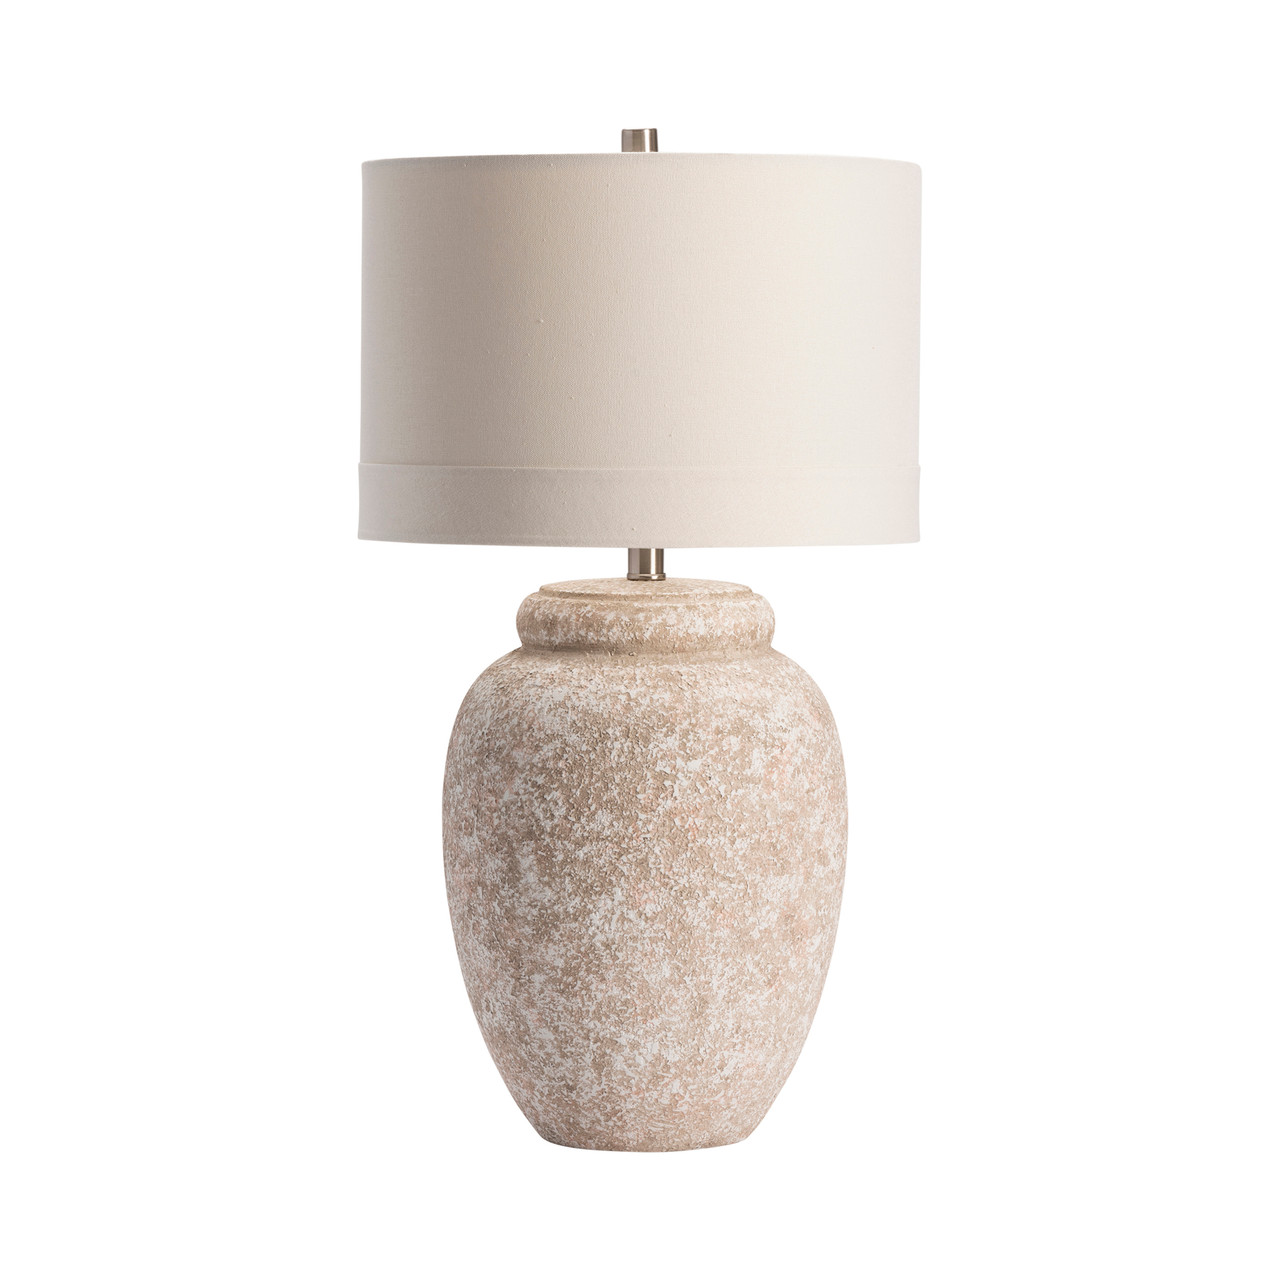 CRESTVIEW COLLECTION CVAZP052 Dune Large Scale Textured Ceramic Table Lamp